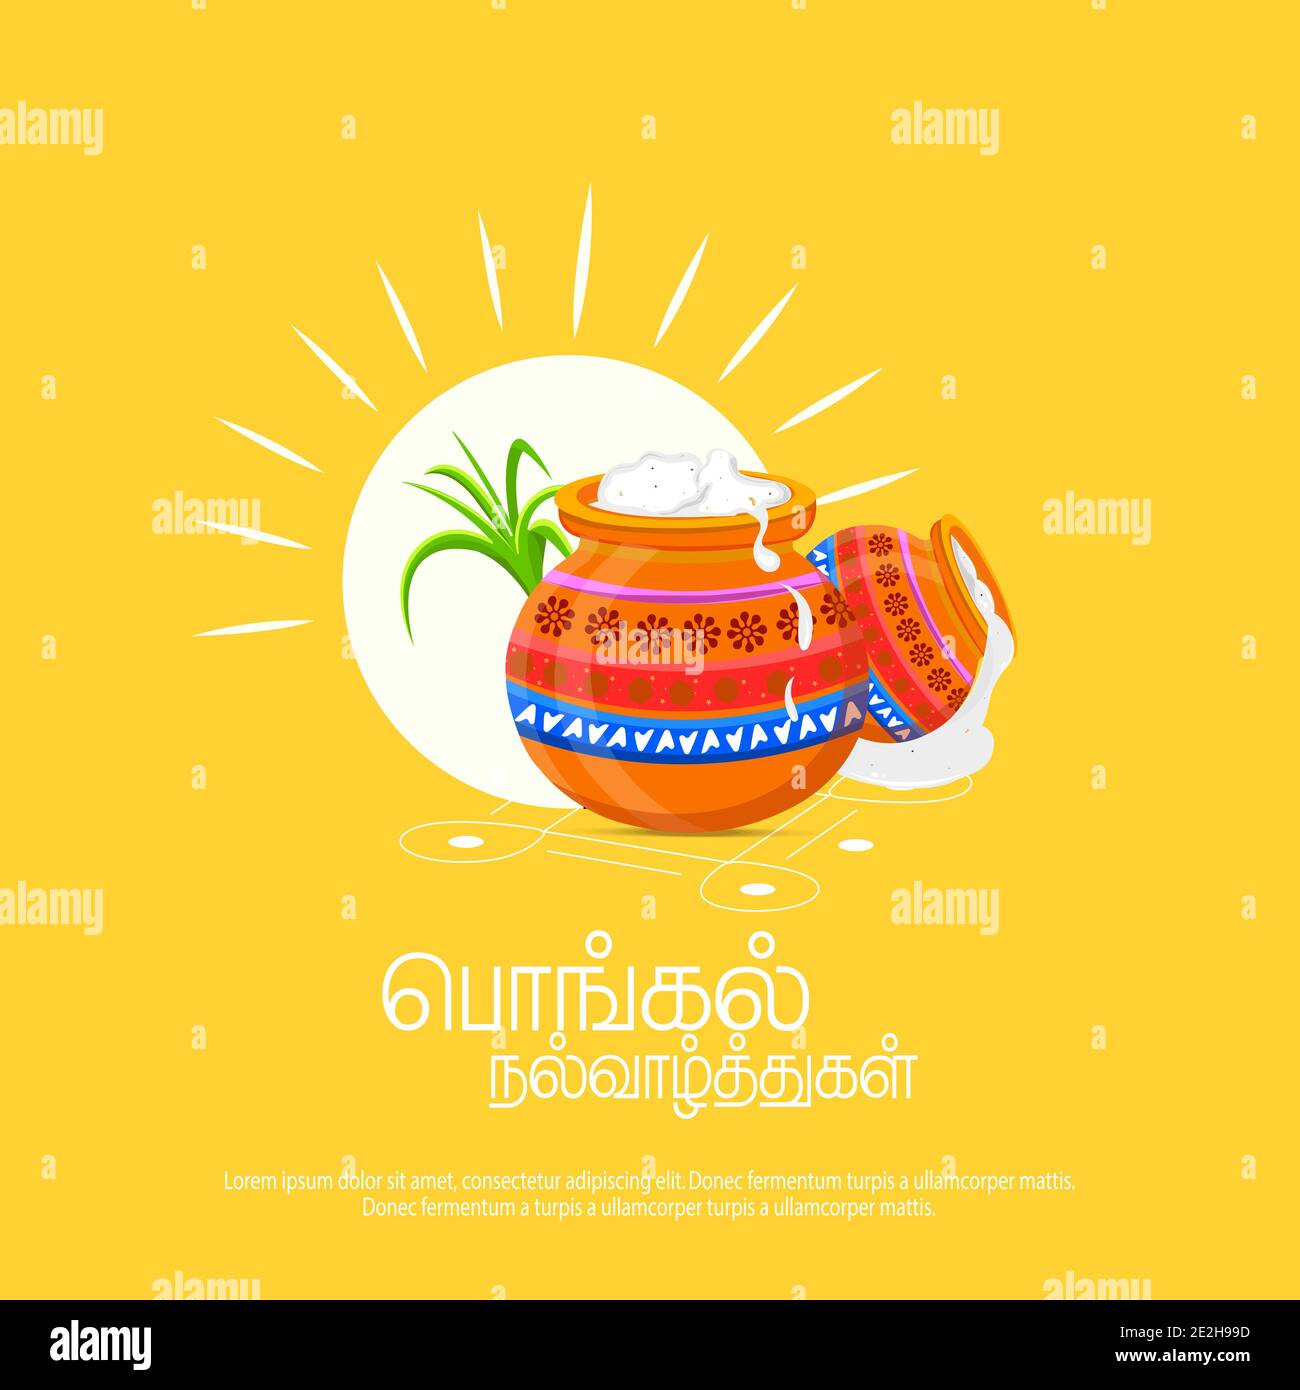 Happy Pongal religious festival of South India celebration background Stock Vector